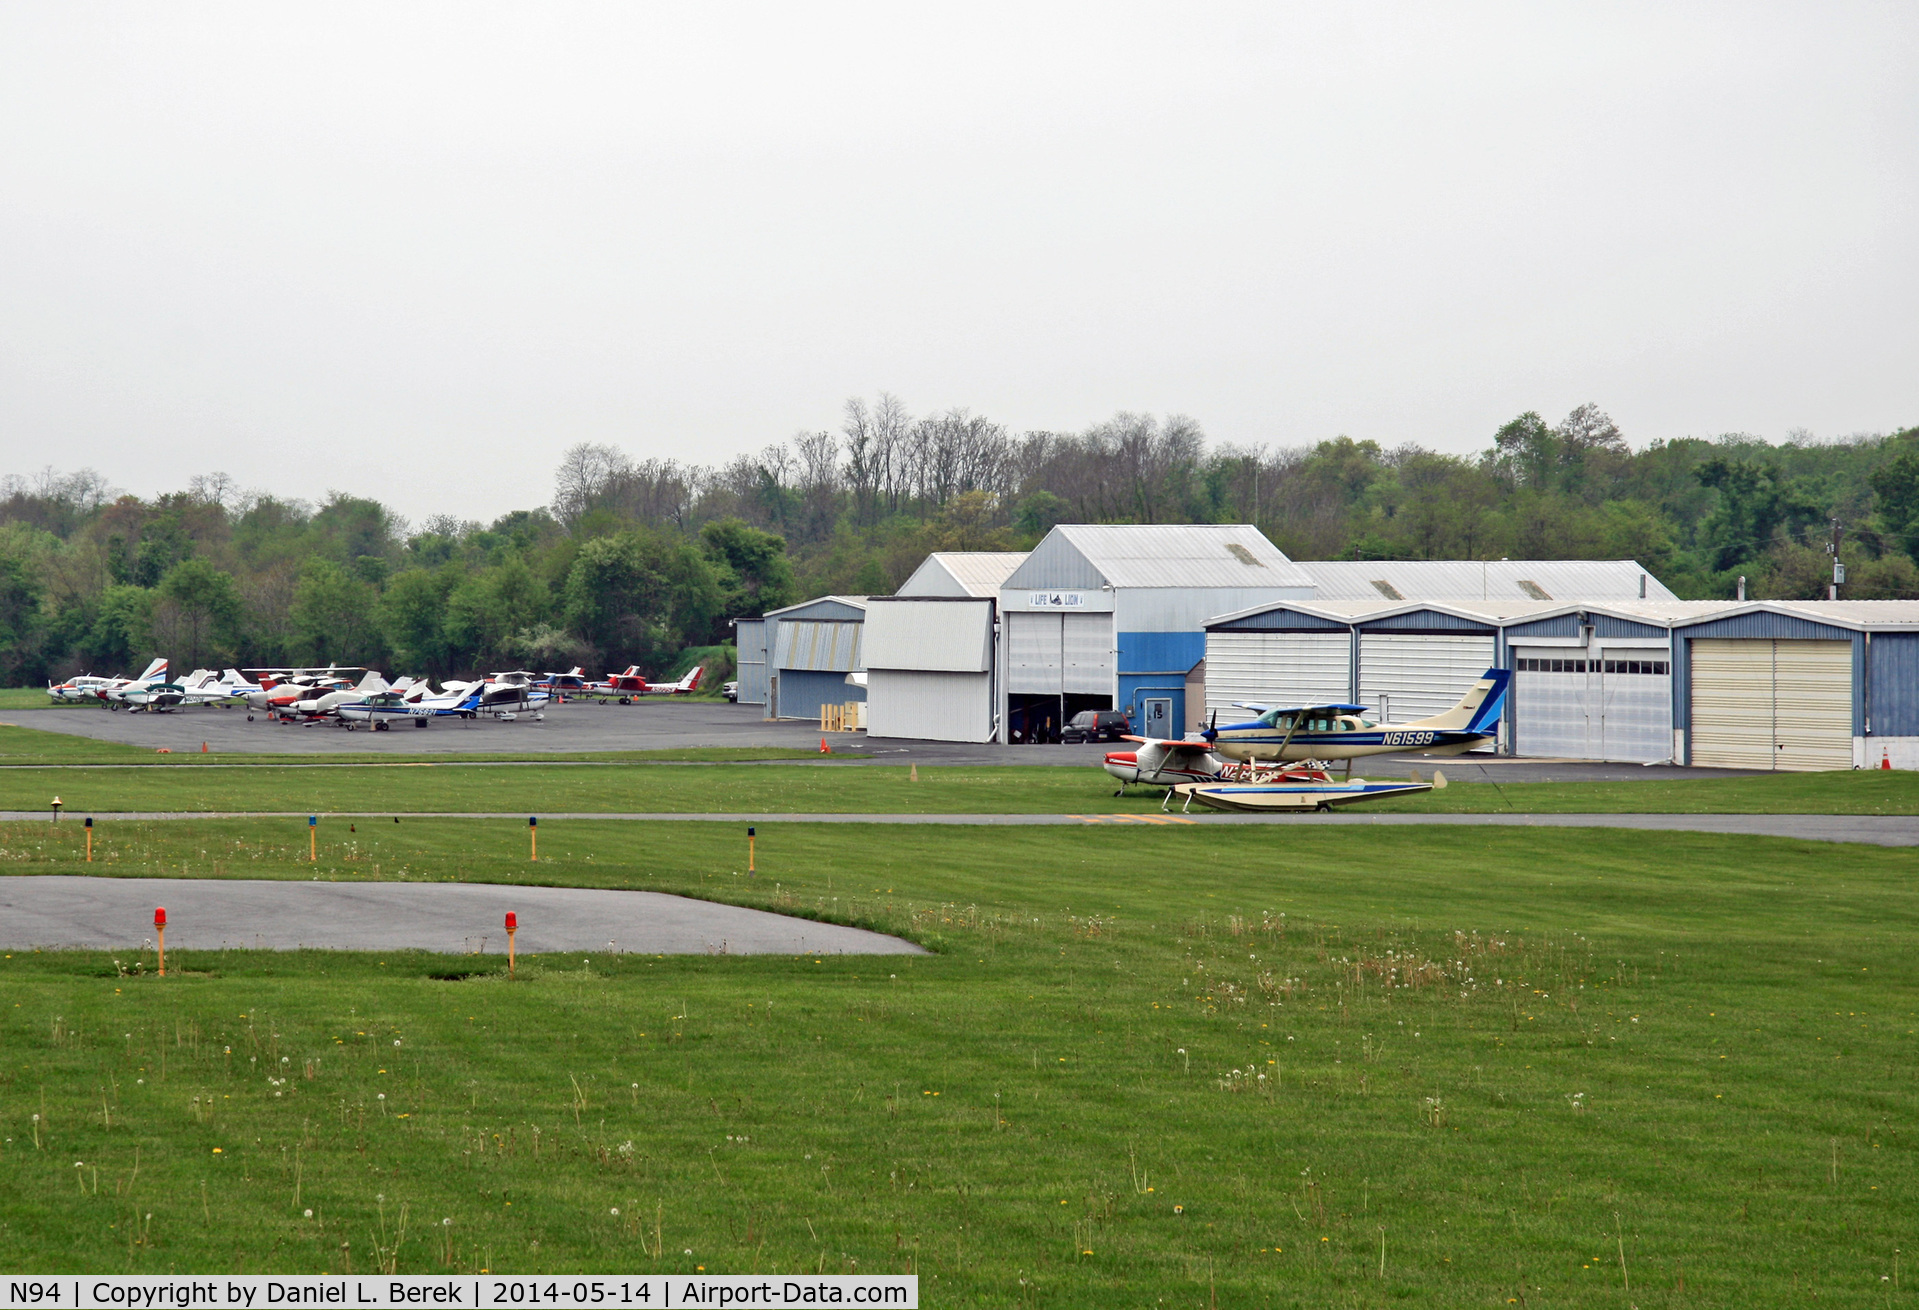 Carlisle Airport (N94) - This is the general aviation ramp of Carlisle Airport - accessible only to pilots and their passengers.